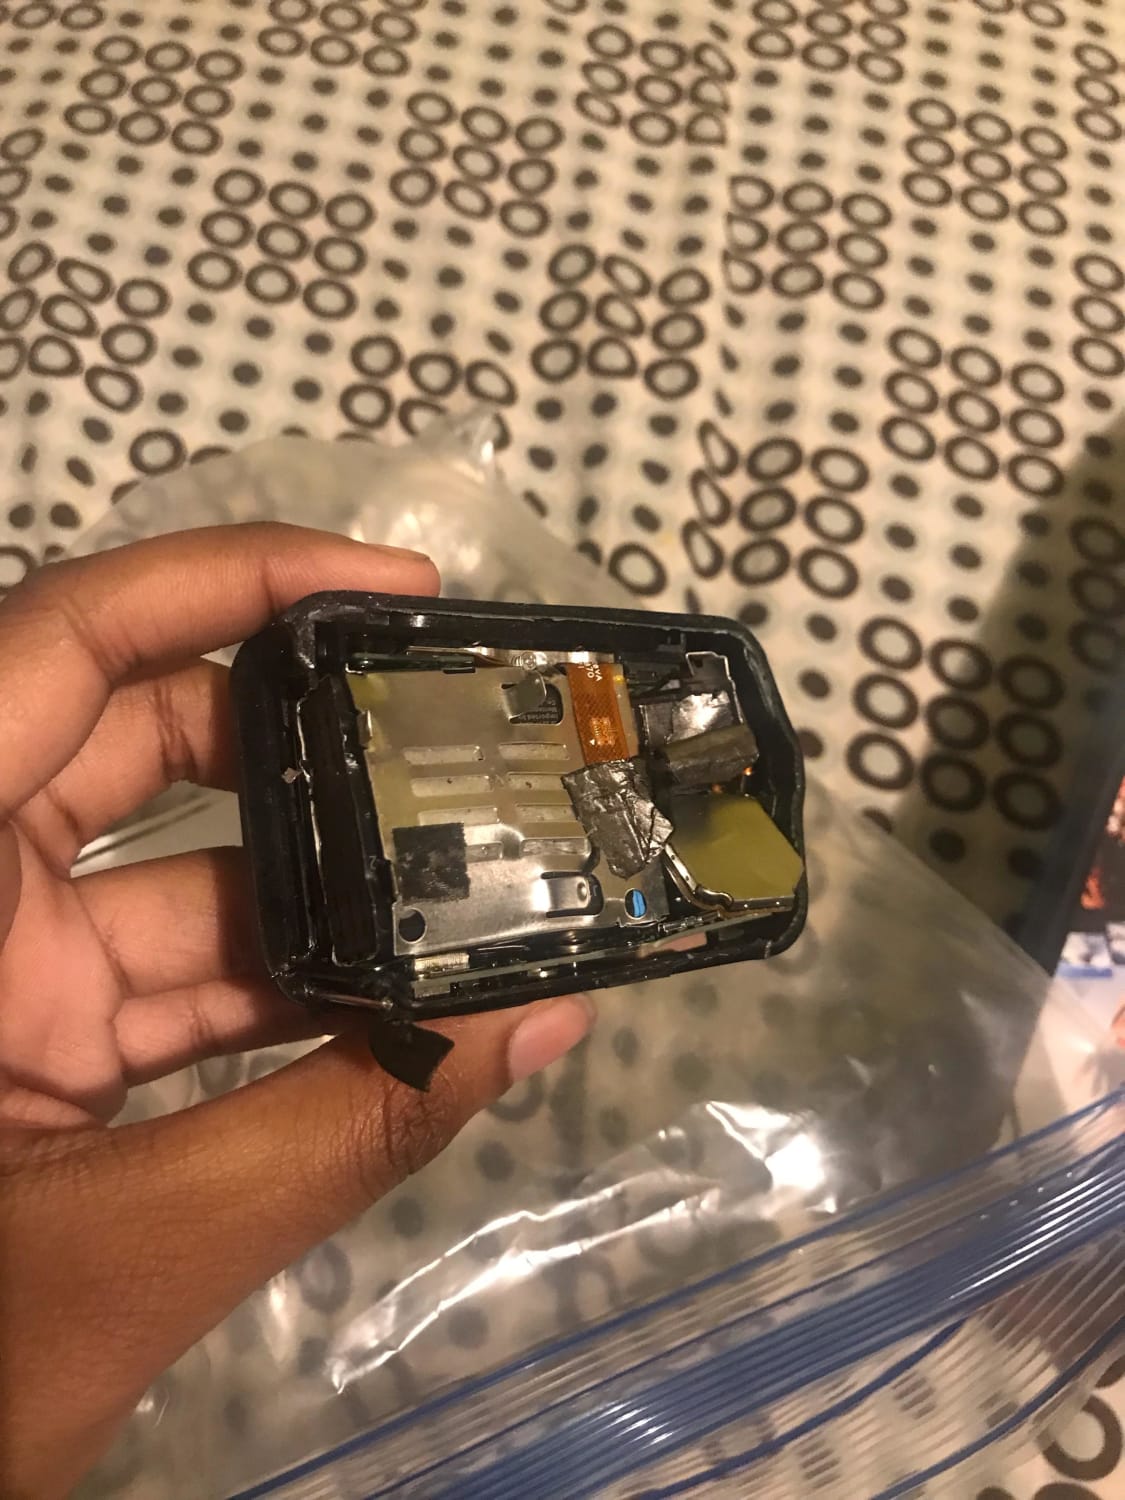 So I back in March I got into a bad car crash that resulted in my GoPro being destroyed and I want to return it. I’m pretty sure they need the serial number if I want to return it but I can’t even access it. So I would like to know if there are any options available for me. I am also a subscriber.